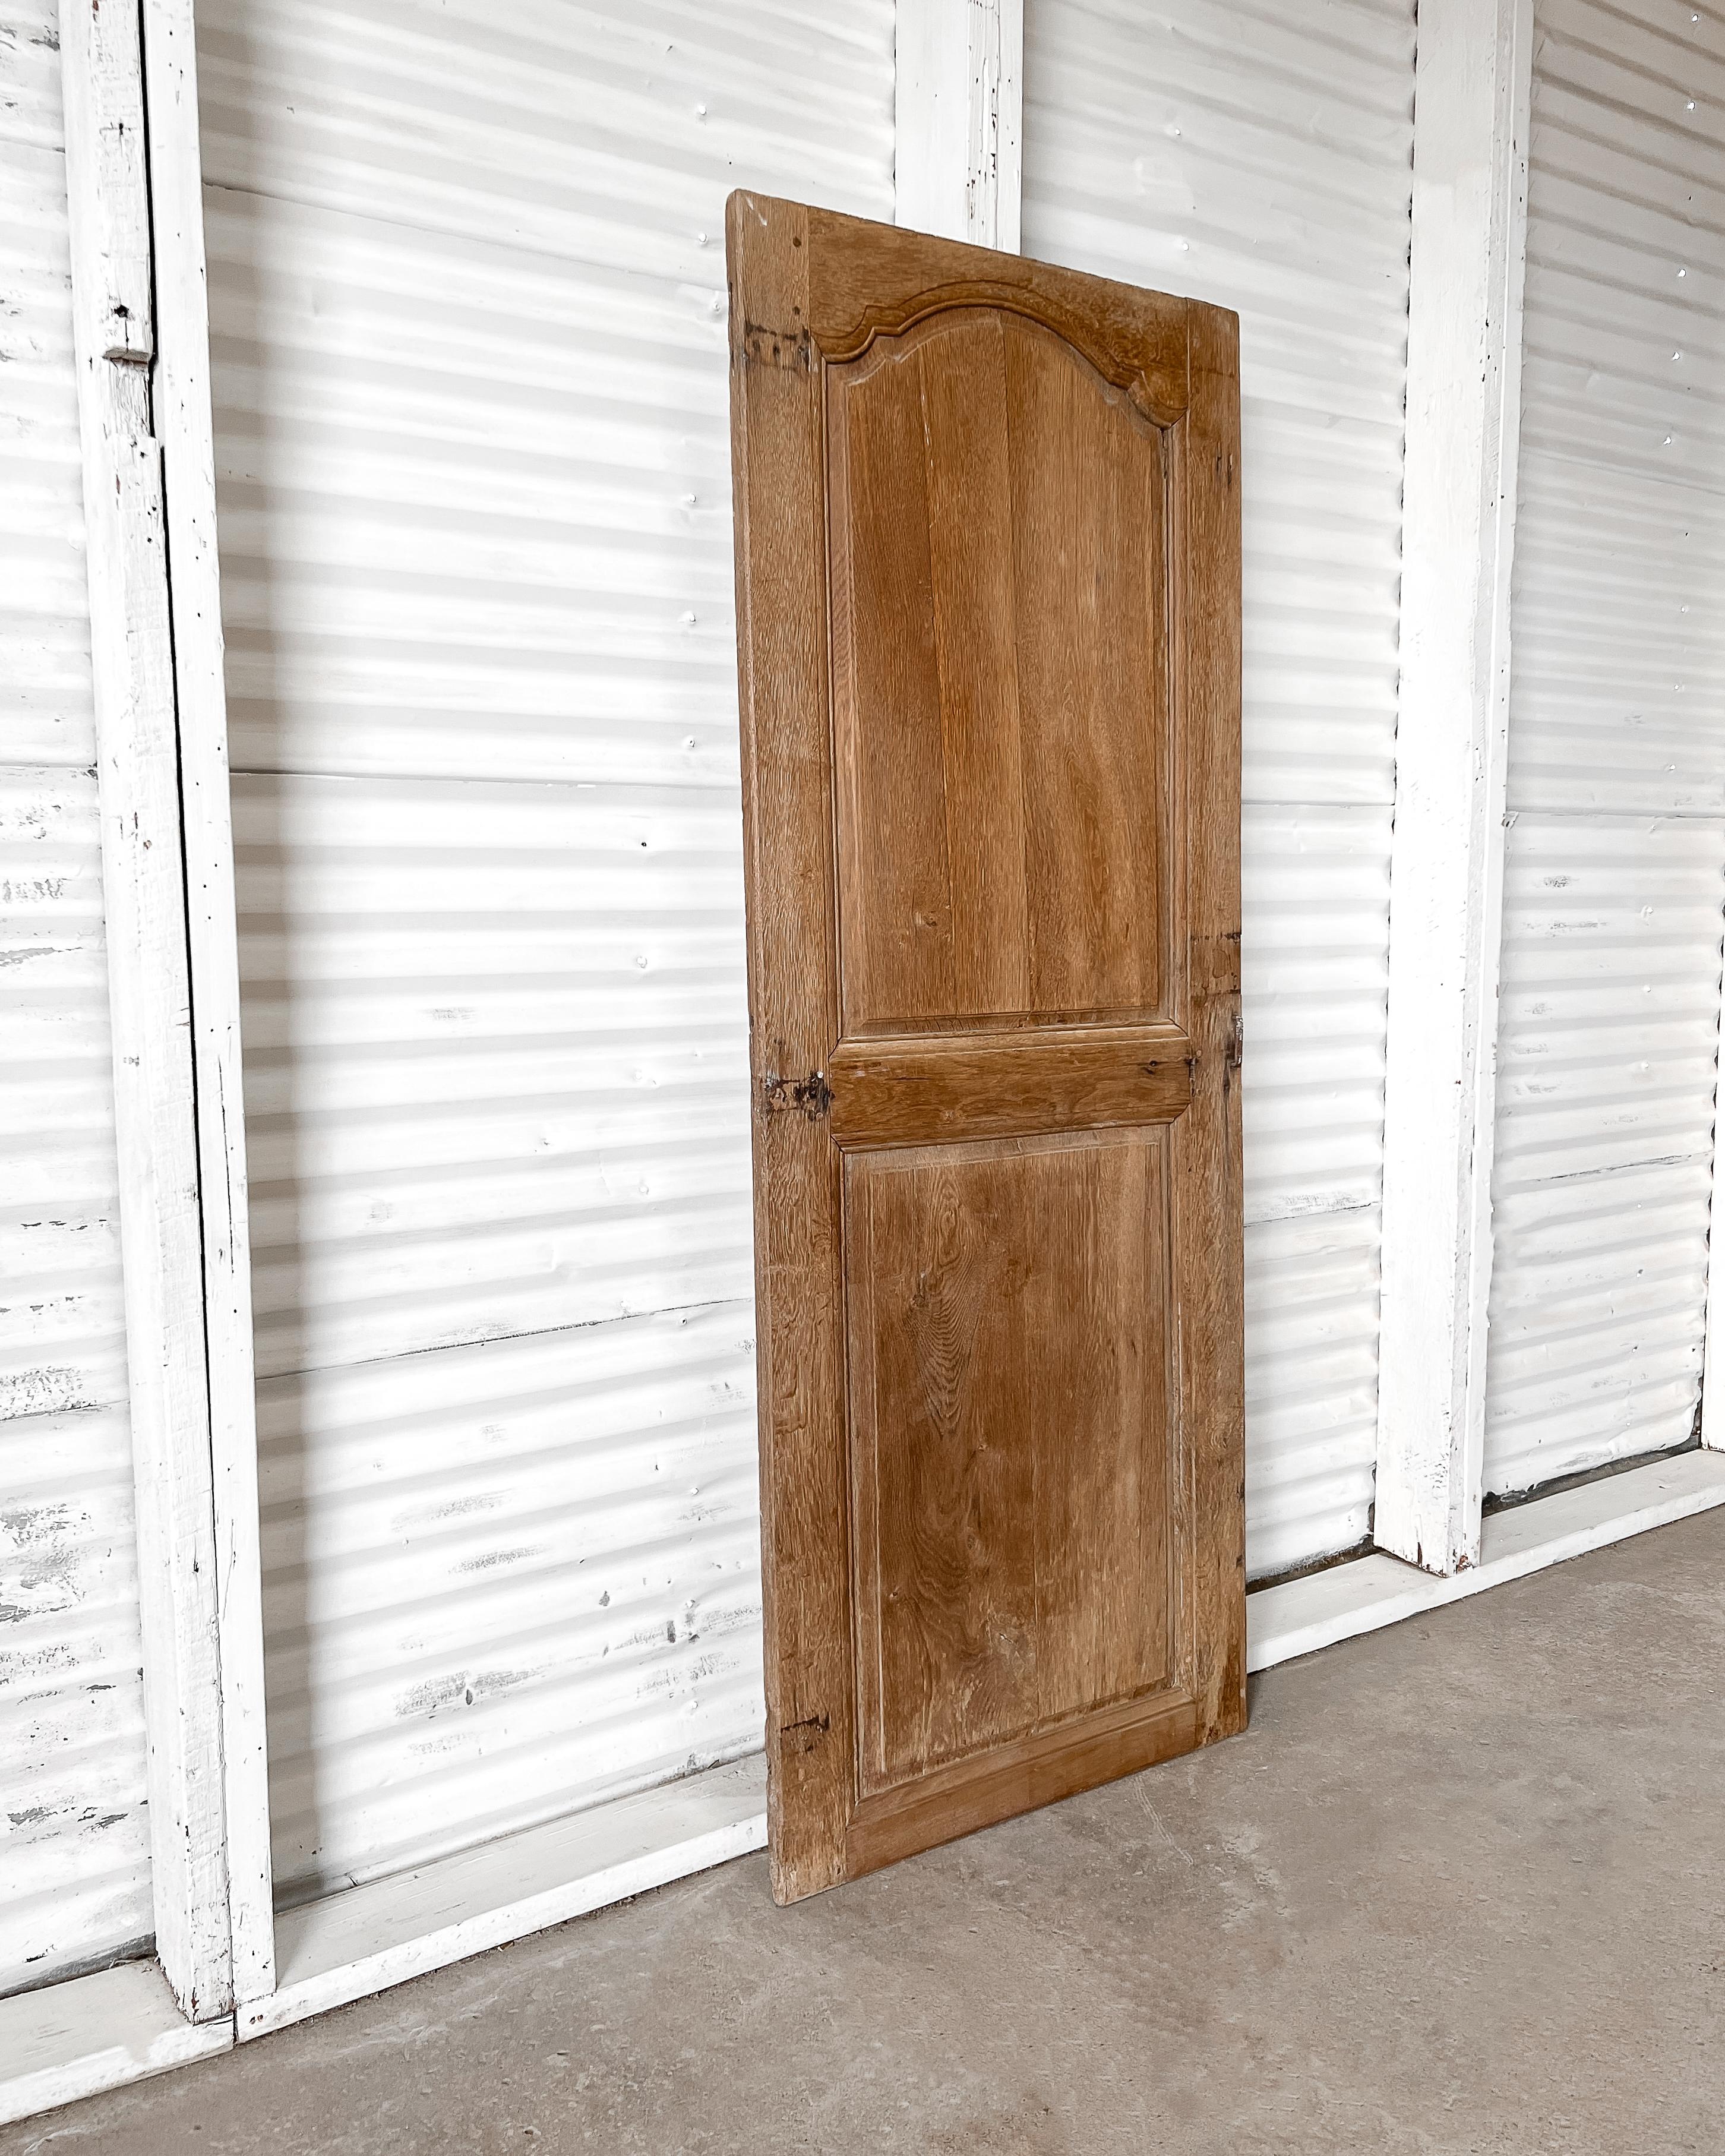 19th Century French Provincial Wardrobe Door In Good Condition For Sale In Mckinney, TX